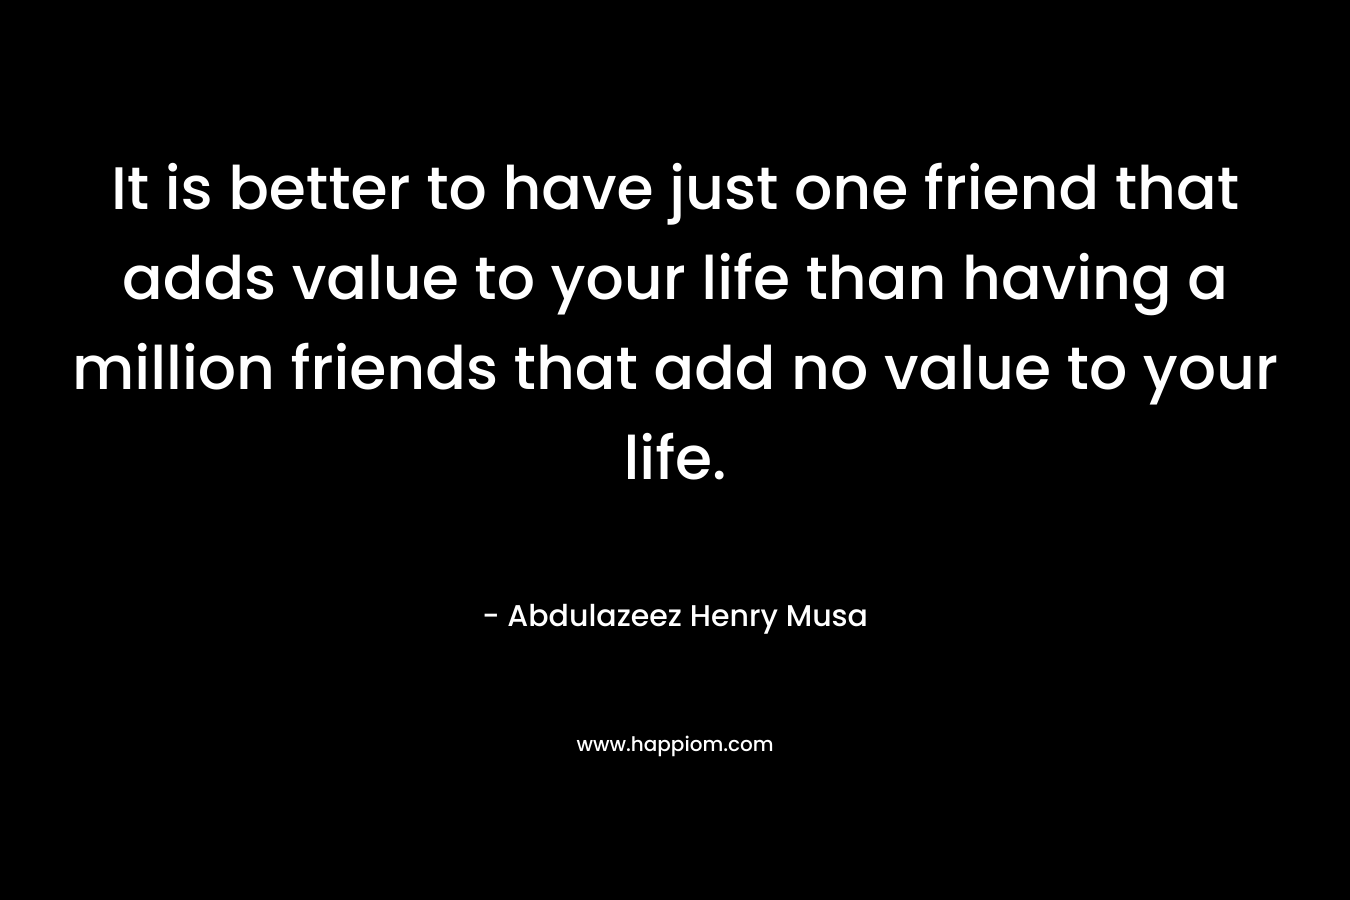 It is better to have just one friend that adds value to your life than having a million friends that add no value to your life. – Abdulazeez Henry Musa